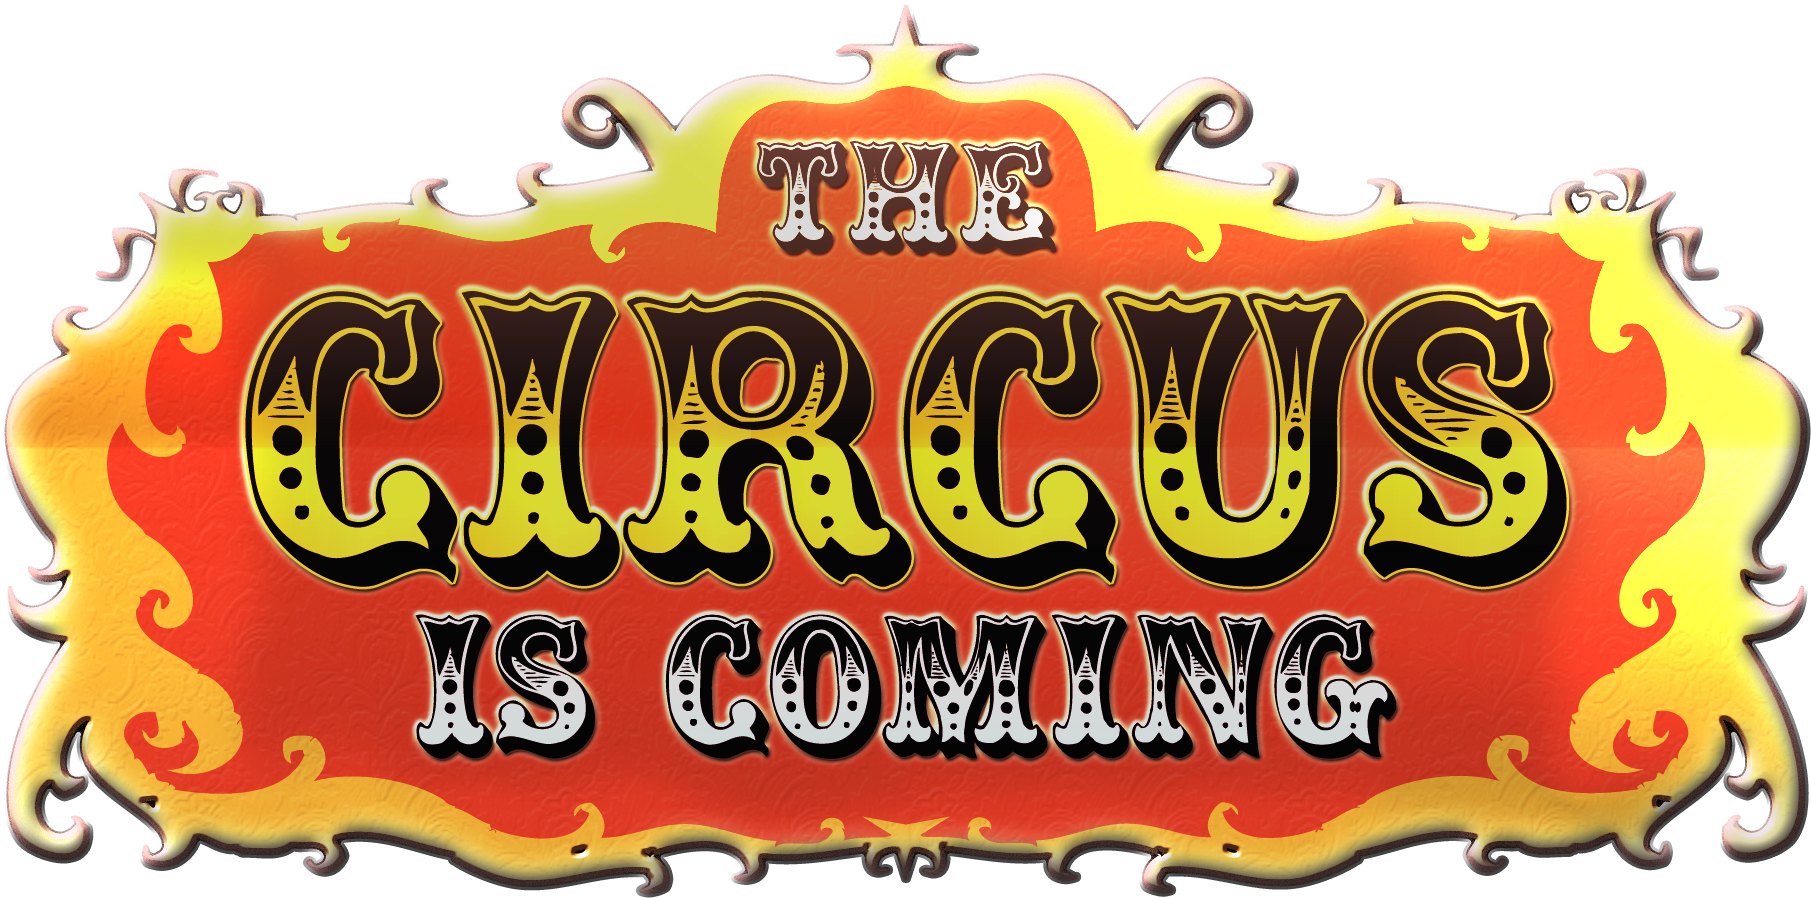 The Circus Is Coming - Circus Is Coming To Town (1850x1050)